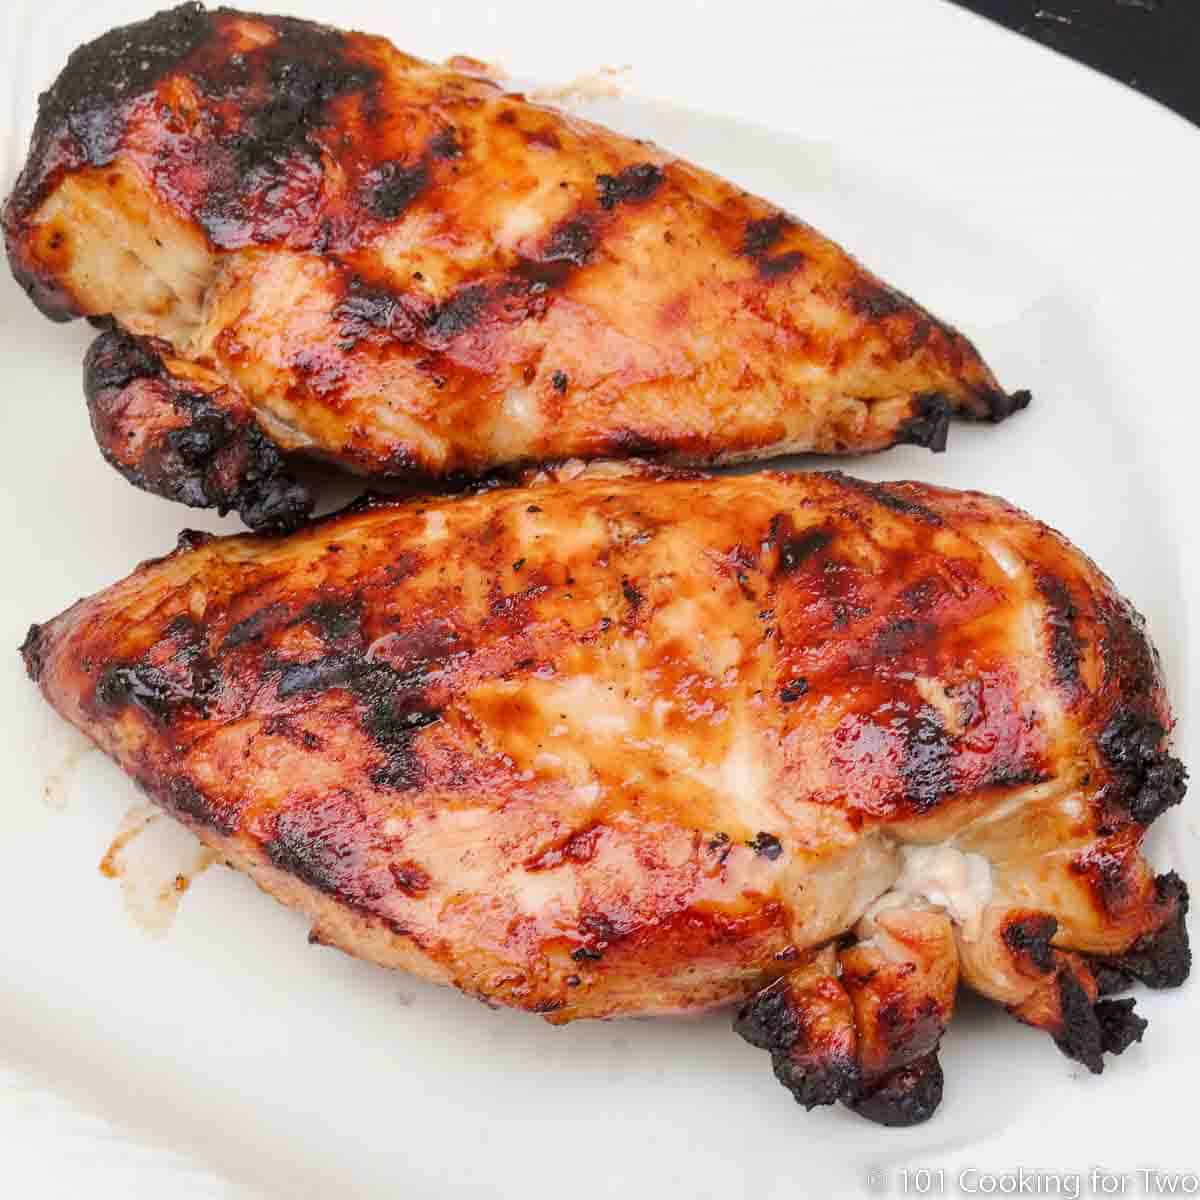 Two BBQ chicken breasts on white plate